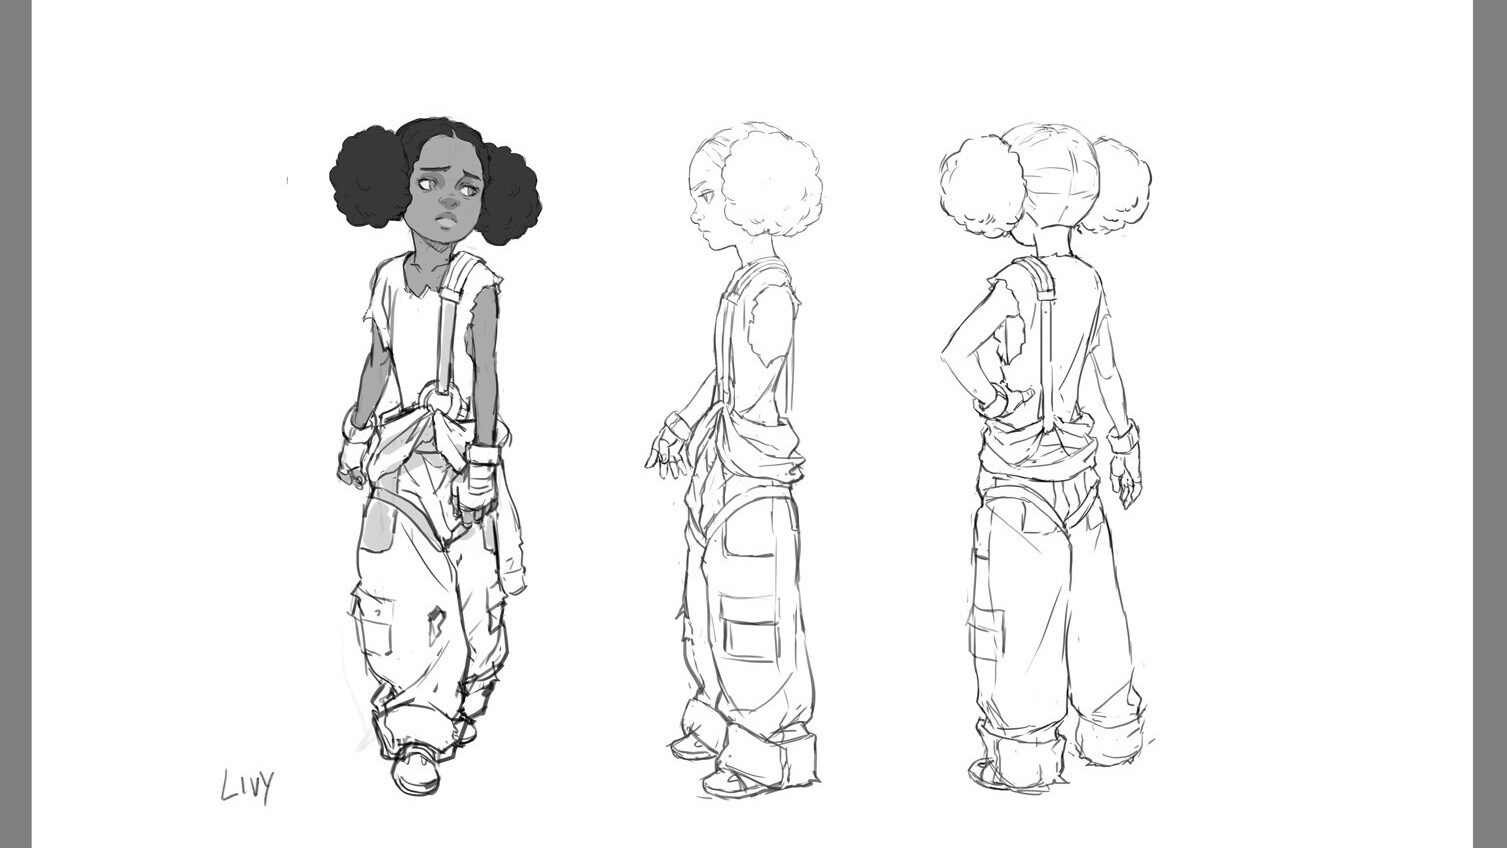 Livy concept art by Rejean Dubois and Arthell Isom